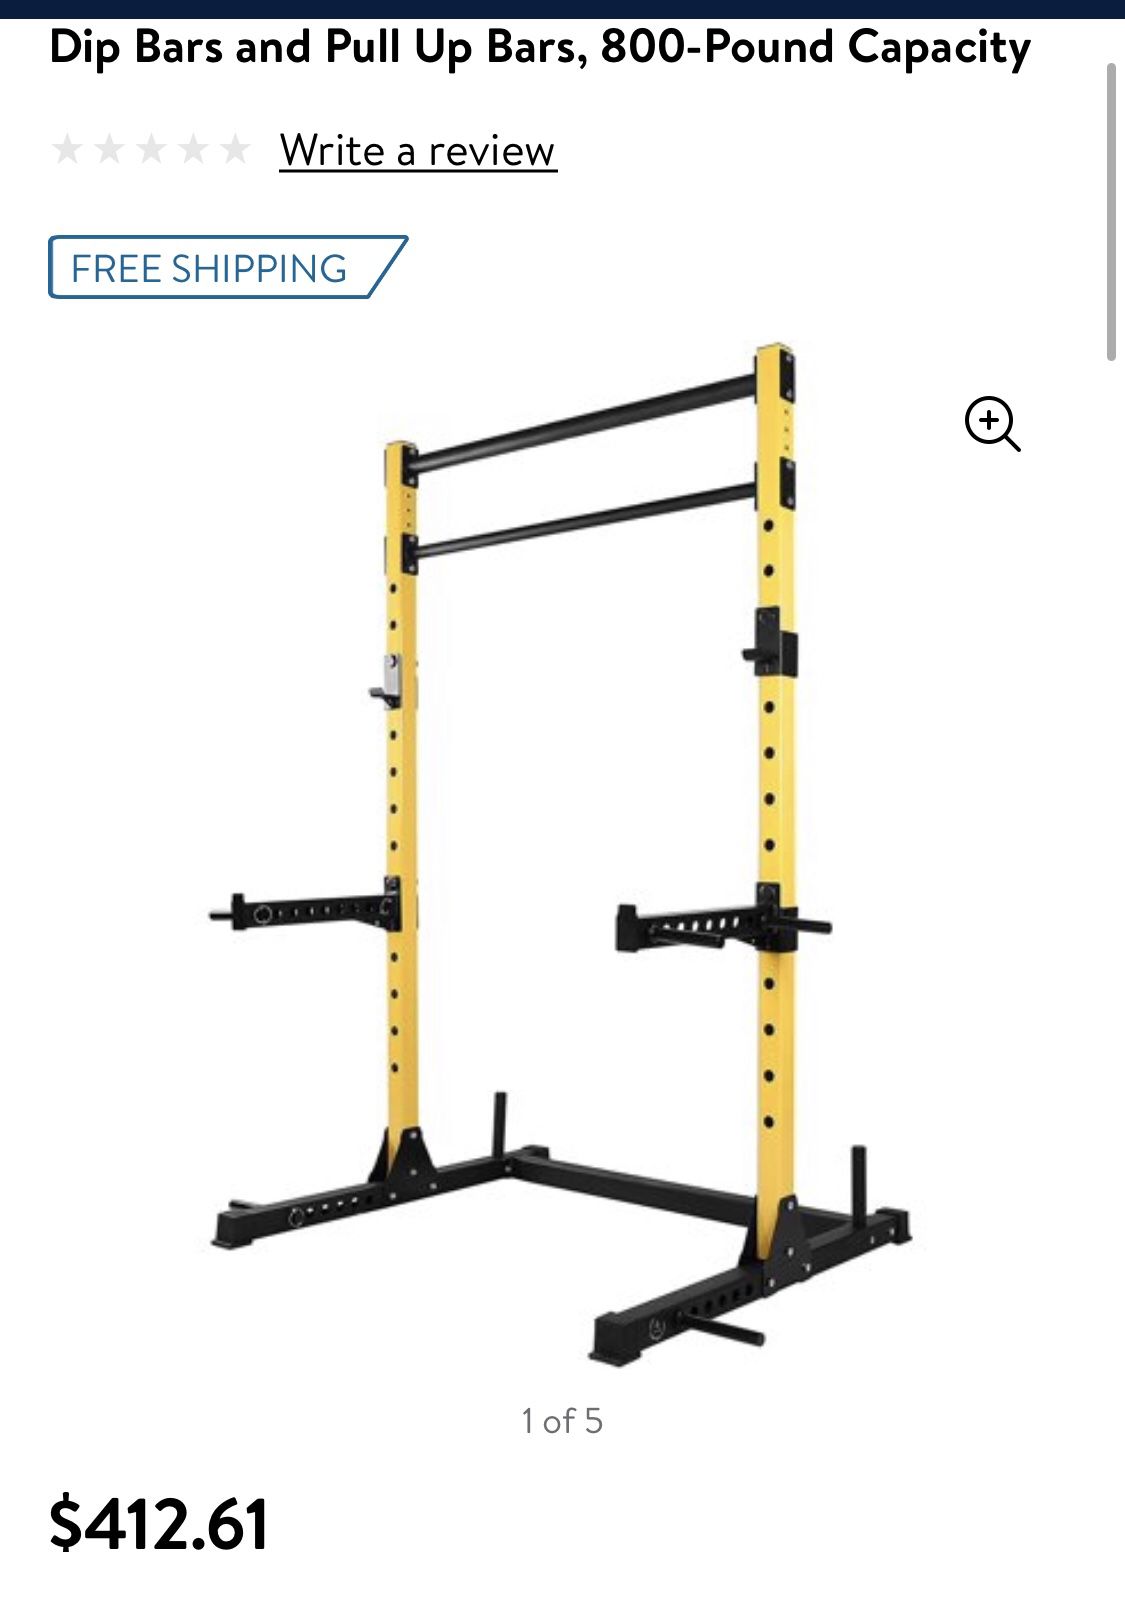 HulkFit Multi-Function Adjustable Power Rack Exercise Squat Stand with J-Hooks, Spotter Arms Dip Bars and Pull Up Bars, 800-Pound Capacity